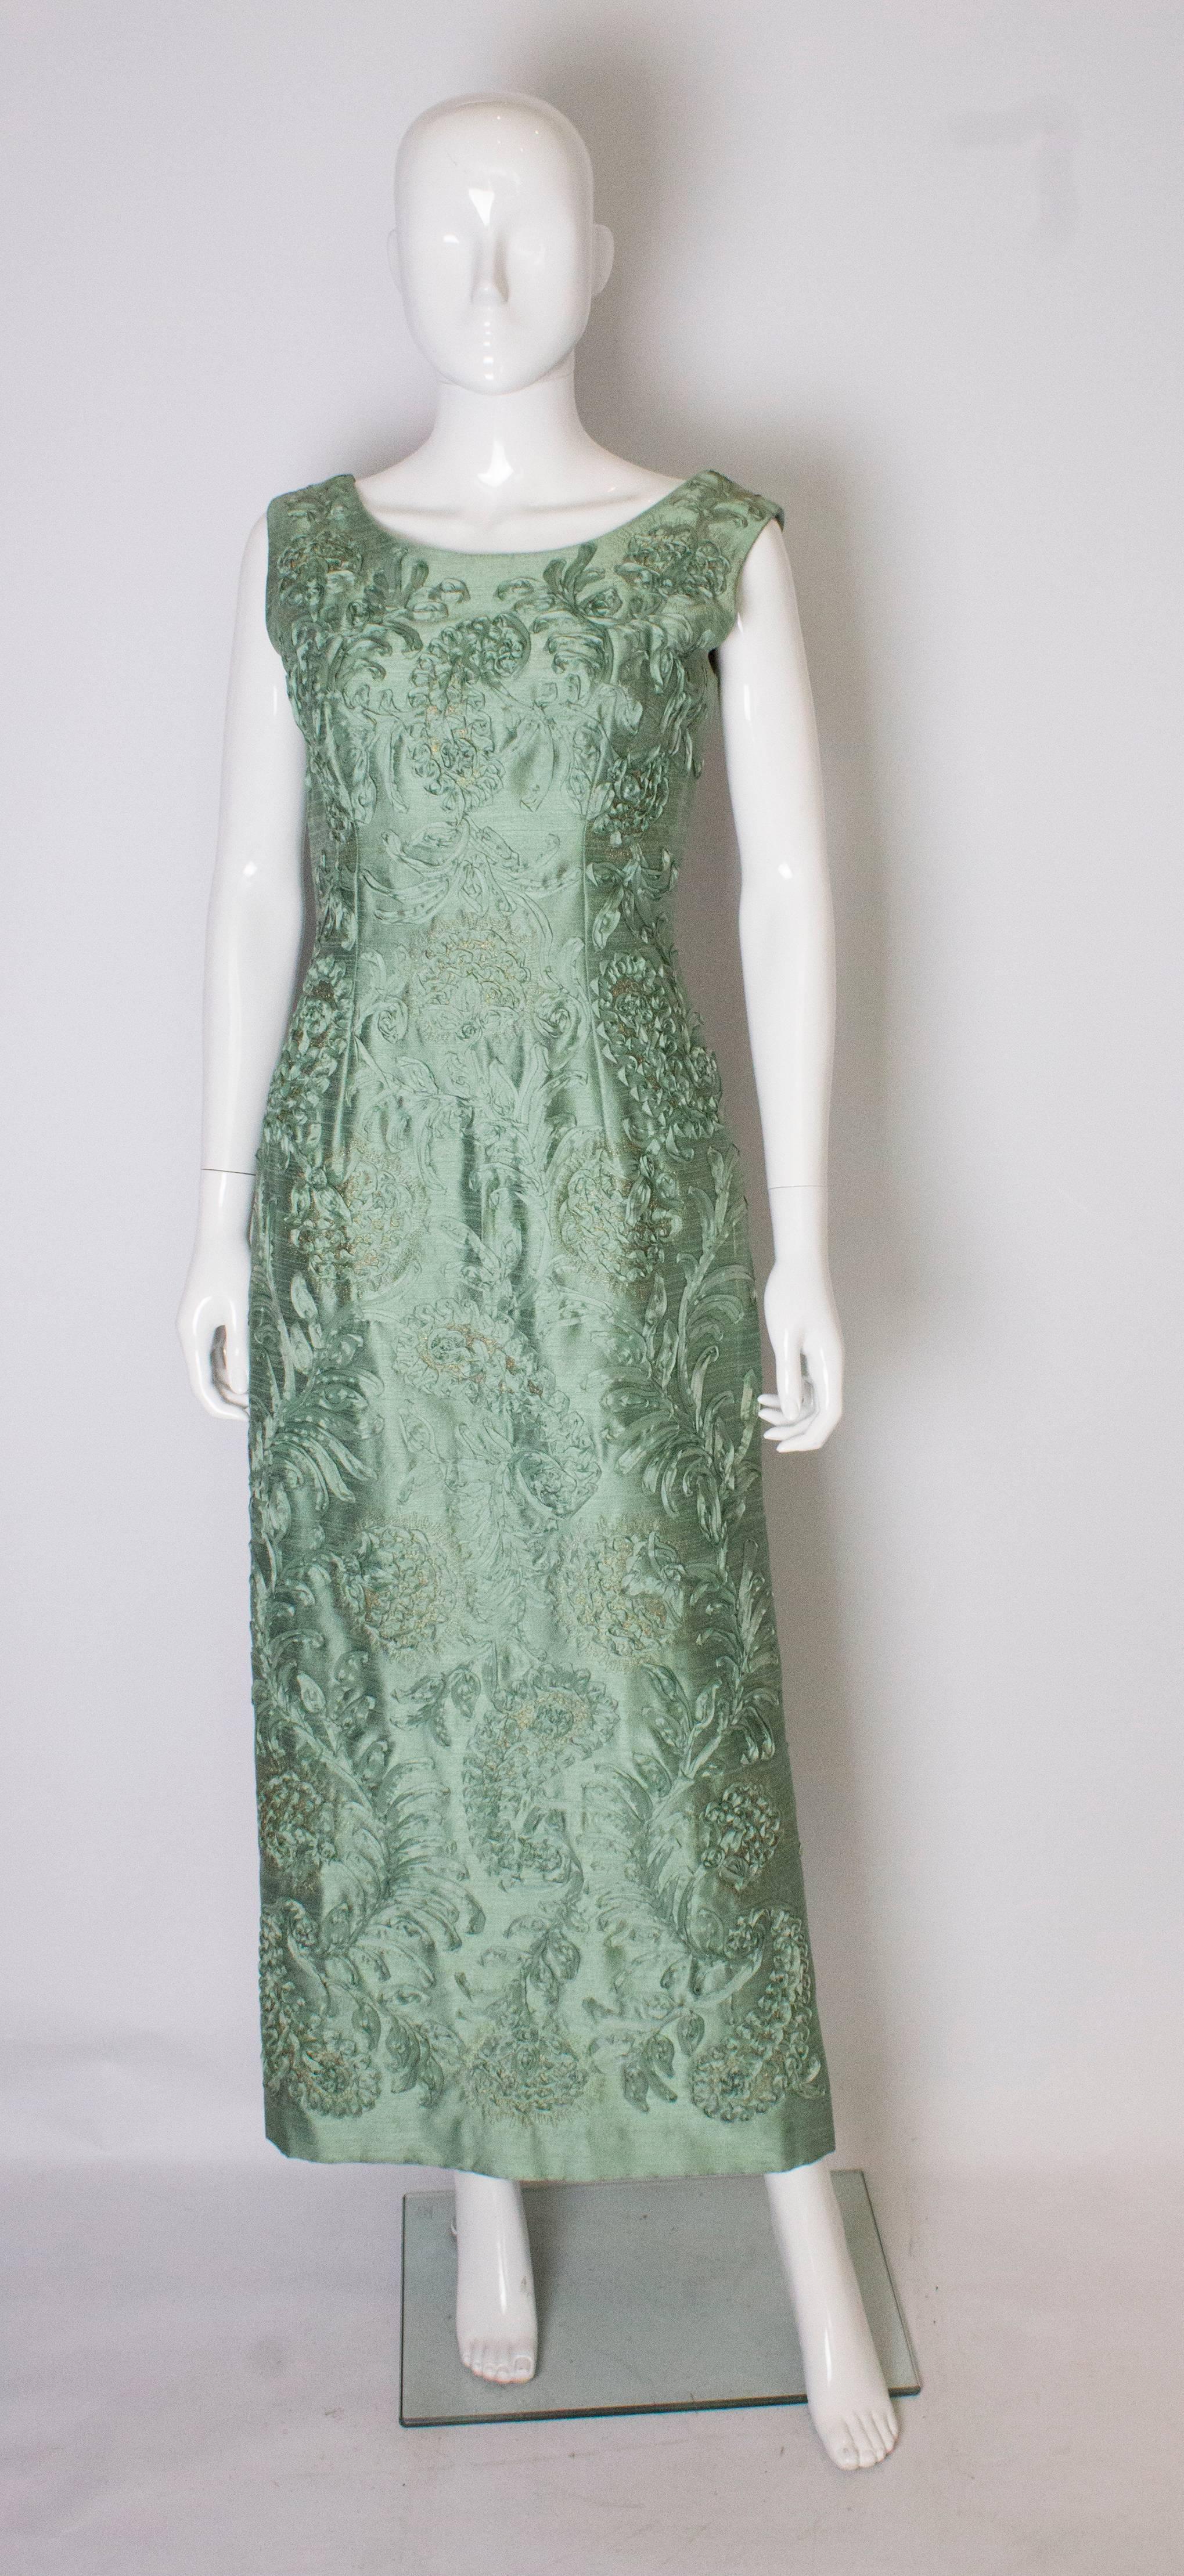 A chic vintage sage green evening gown by Carita Couture . The dress is made of a sage green fabric, speckled with gold and has ribbon decoration.
The dress has a scoop back and front with a  central back zip, and a 15'' slit at the back.